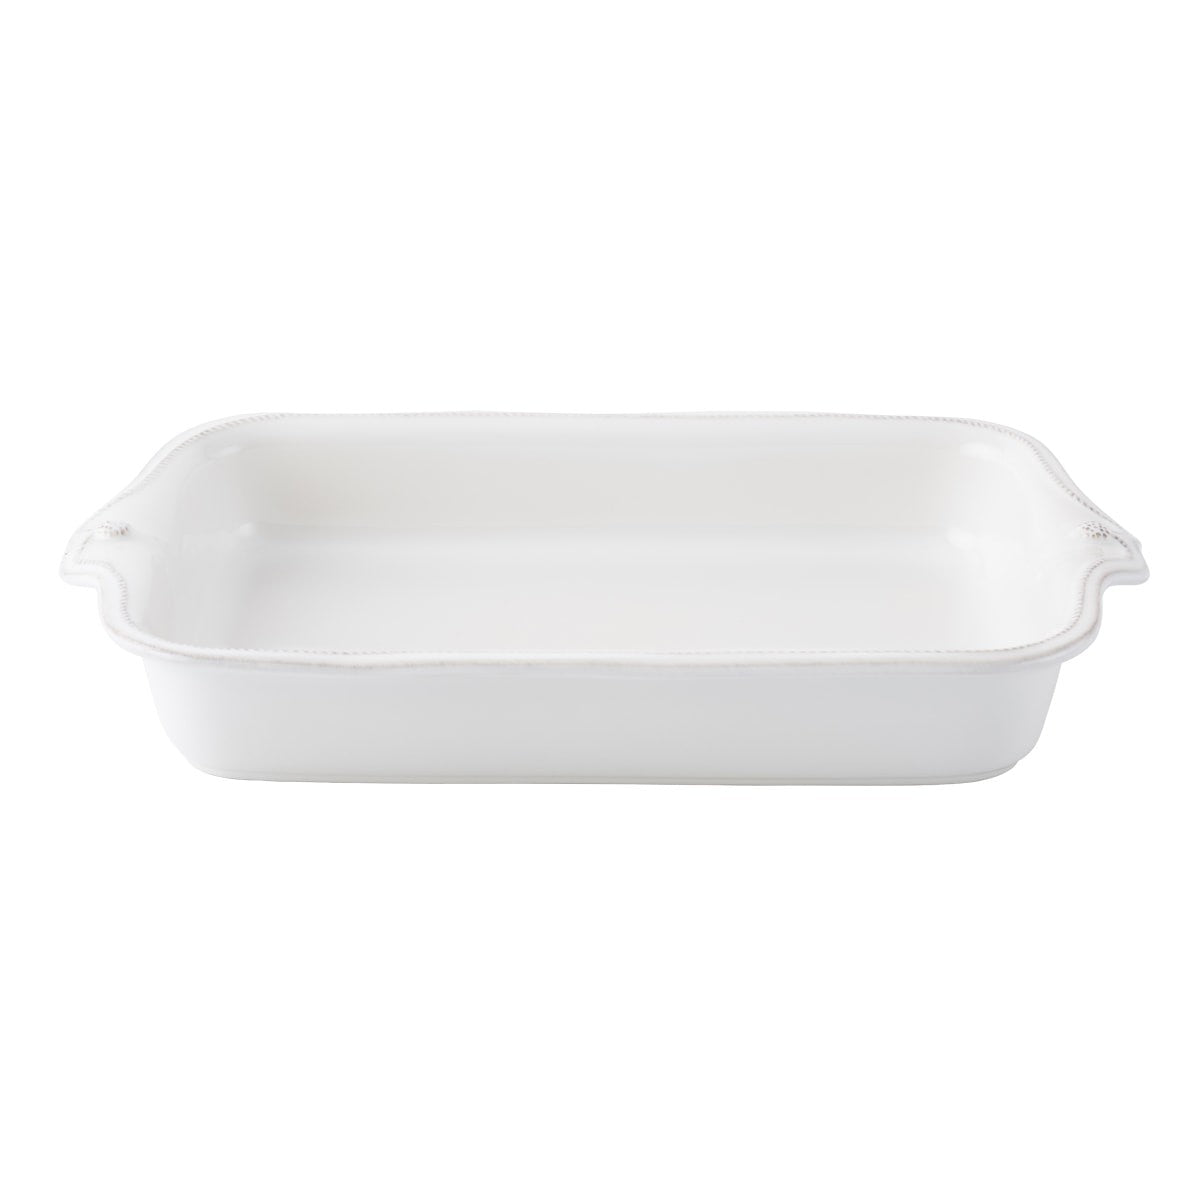 berry and thread rectangle baking dish on a white background